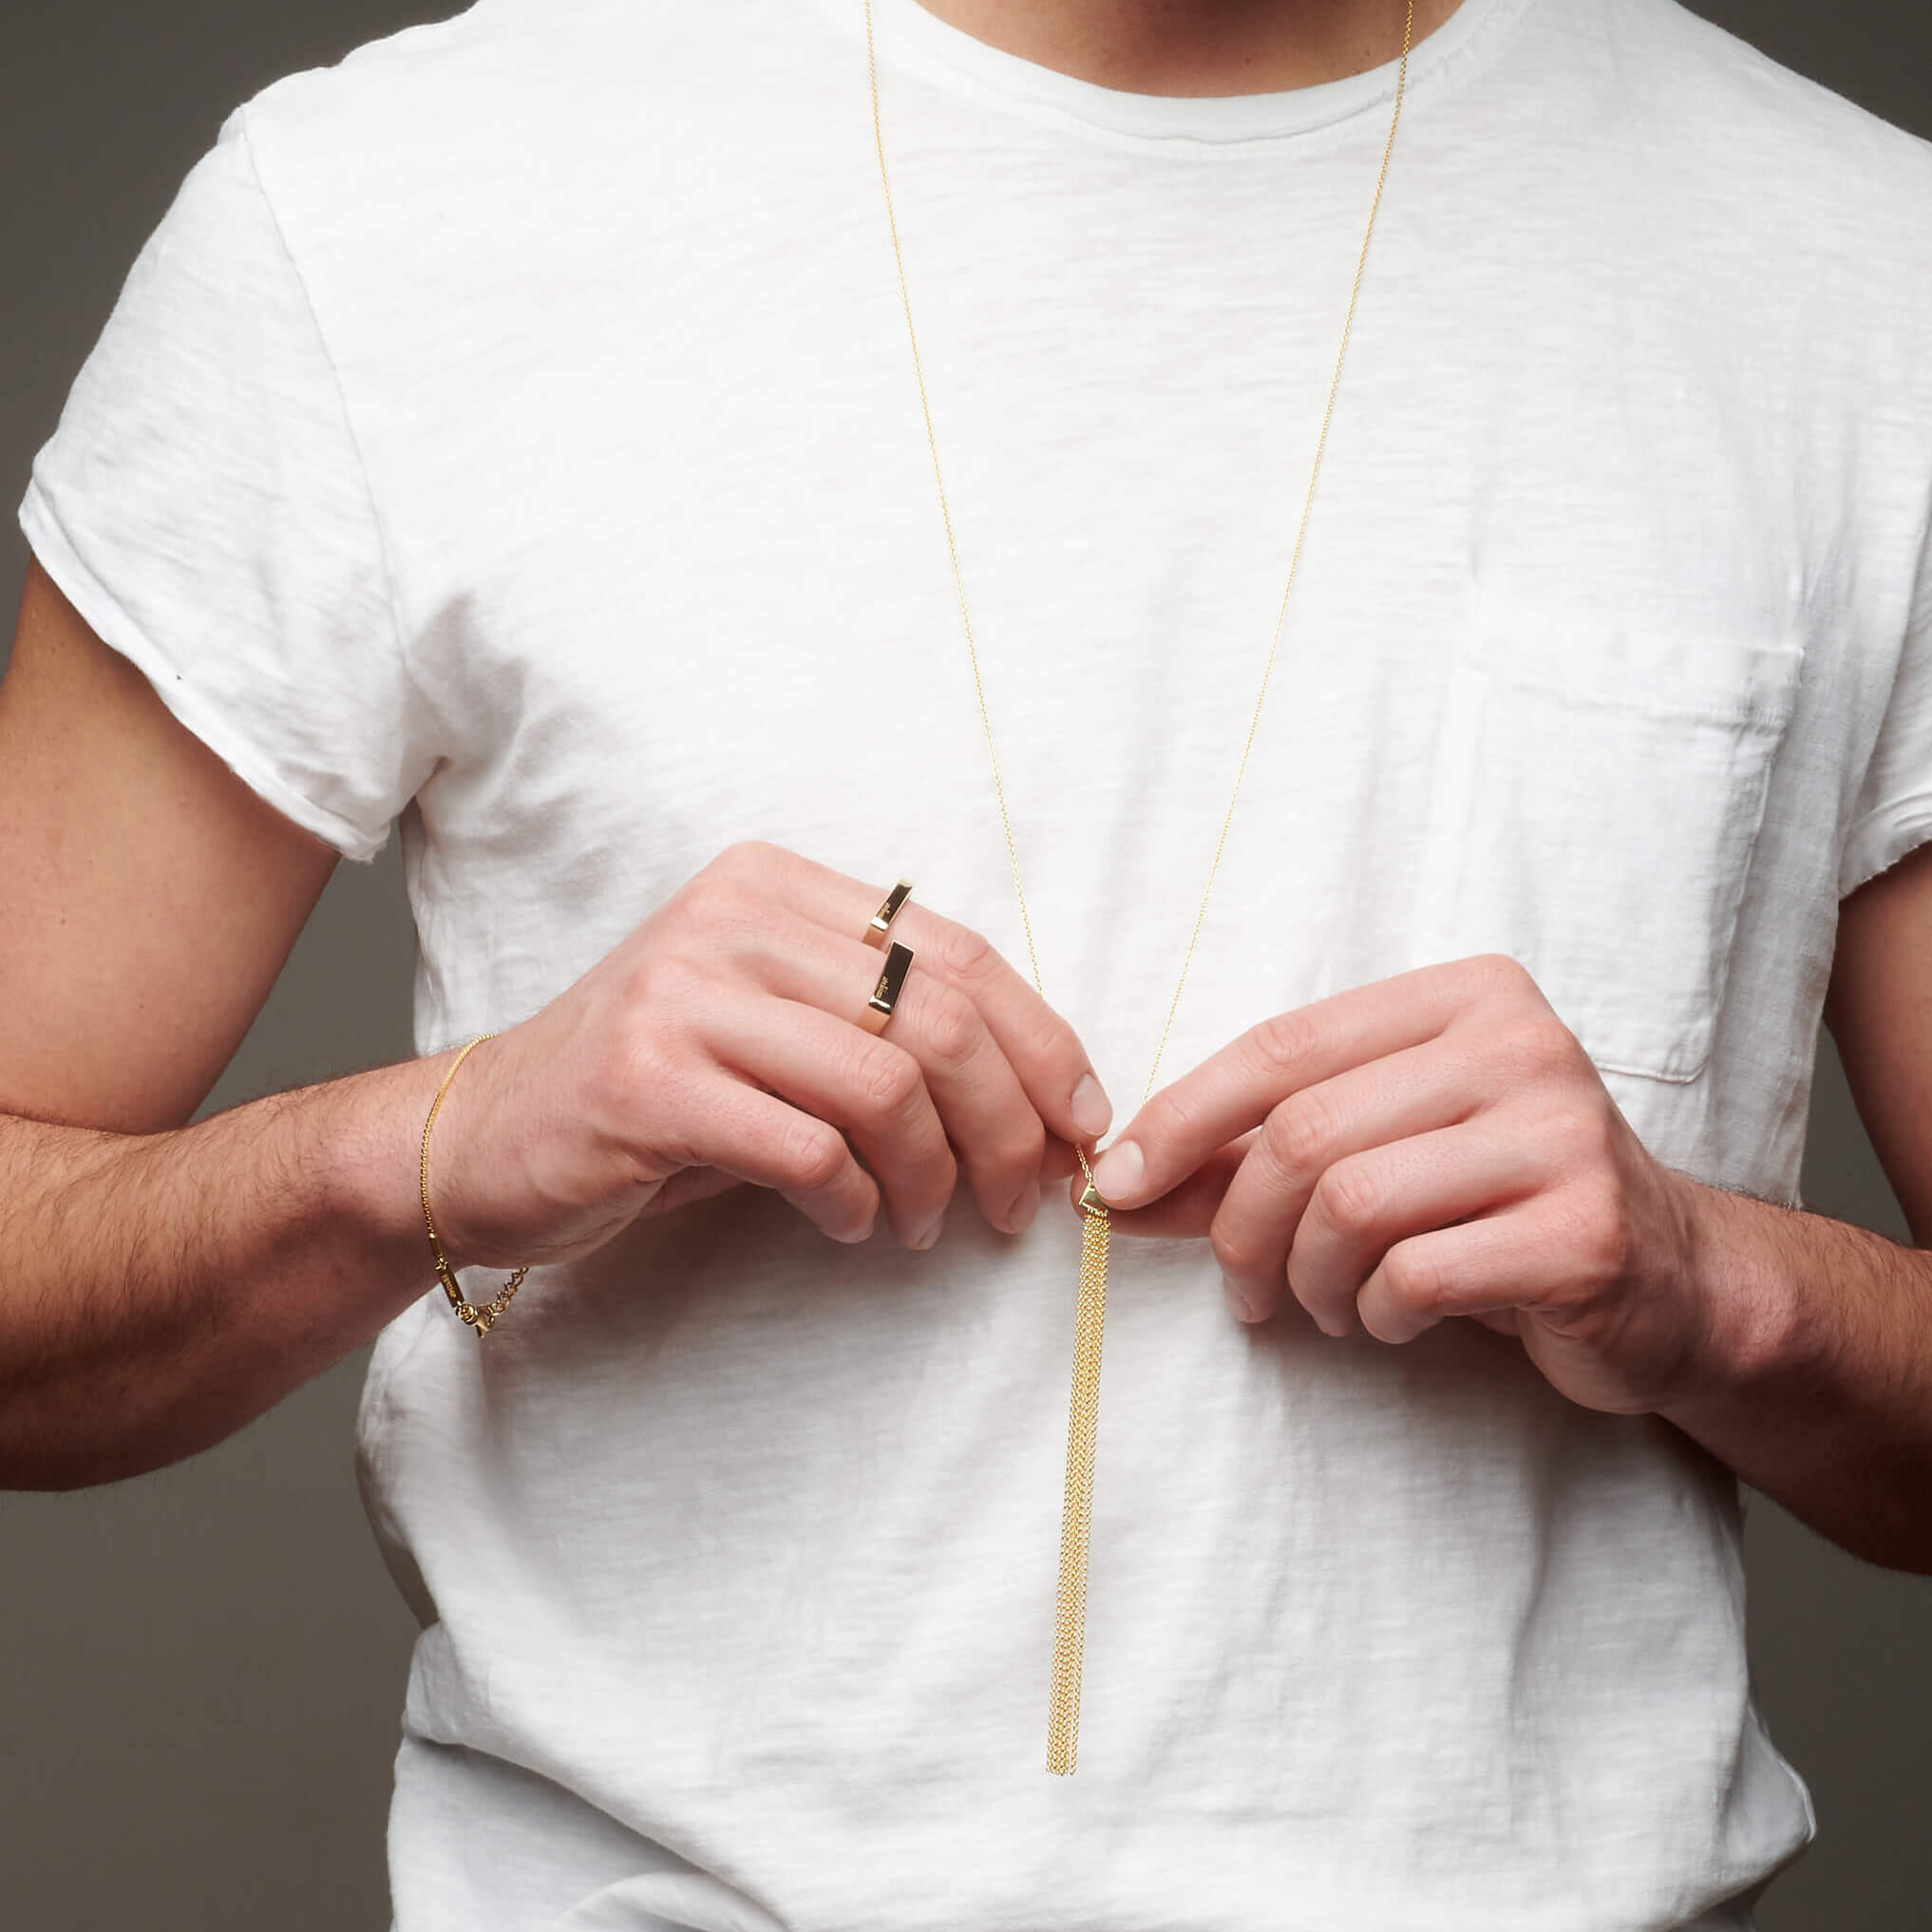 Man's torso with hands holding long atelium necklace wearing gold bracelet and rings